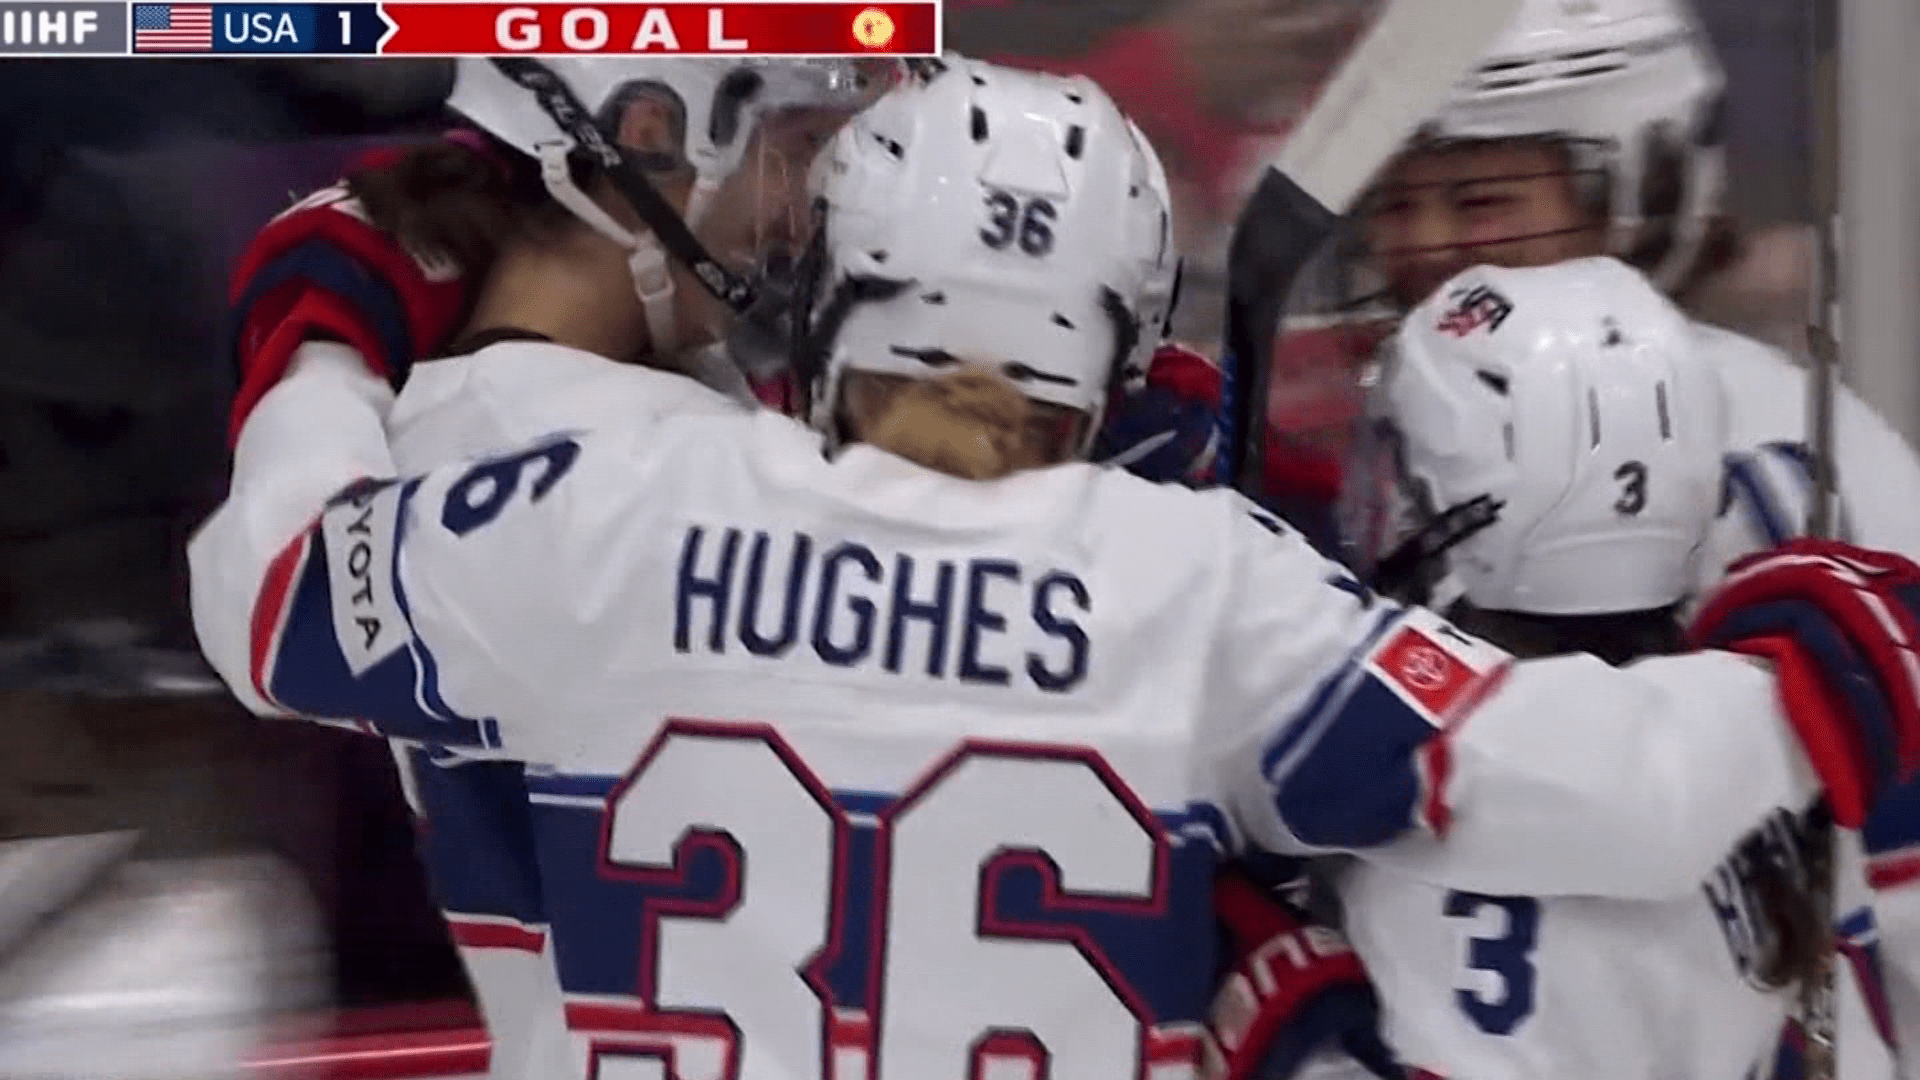 UMD’s Gabbie Hughes debut with the US National